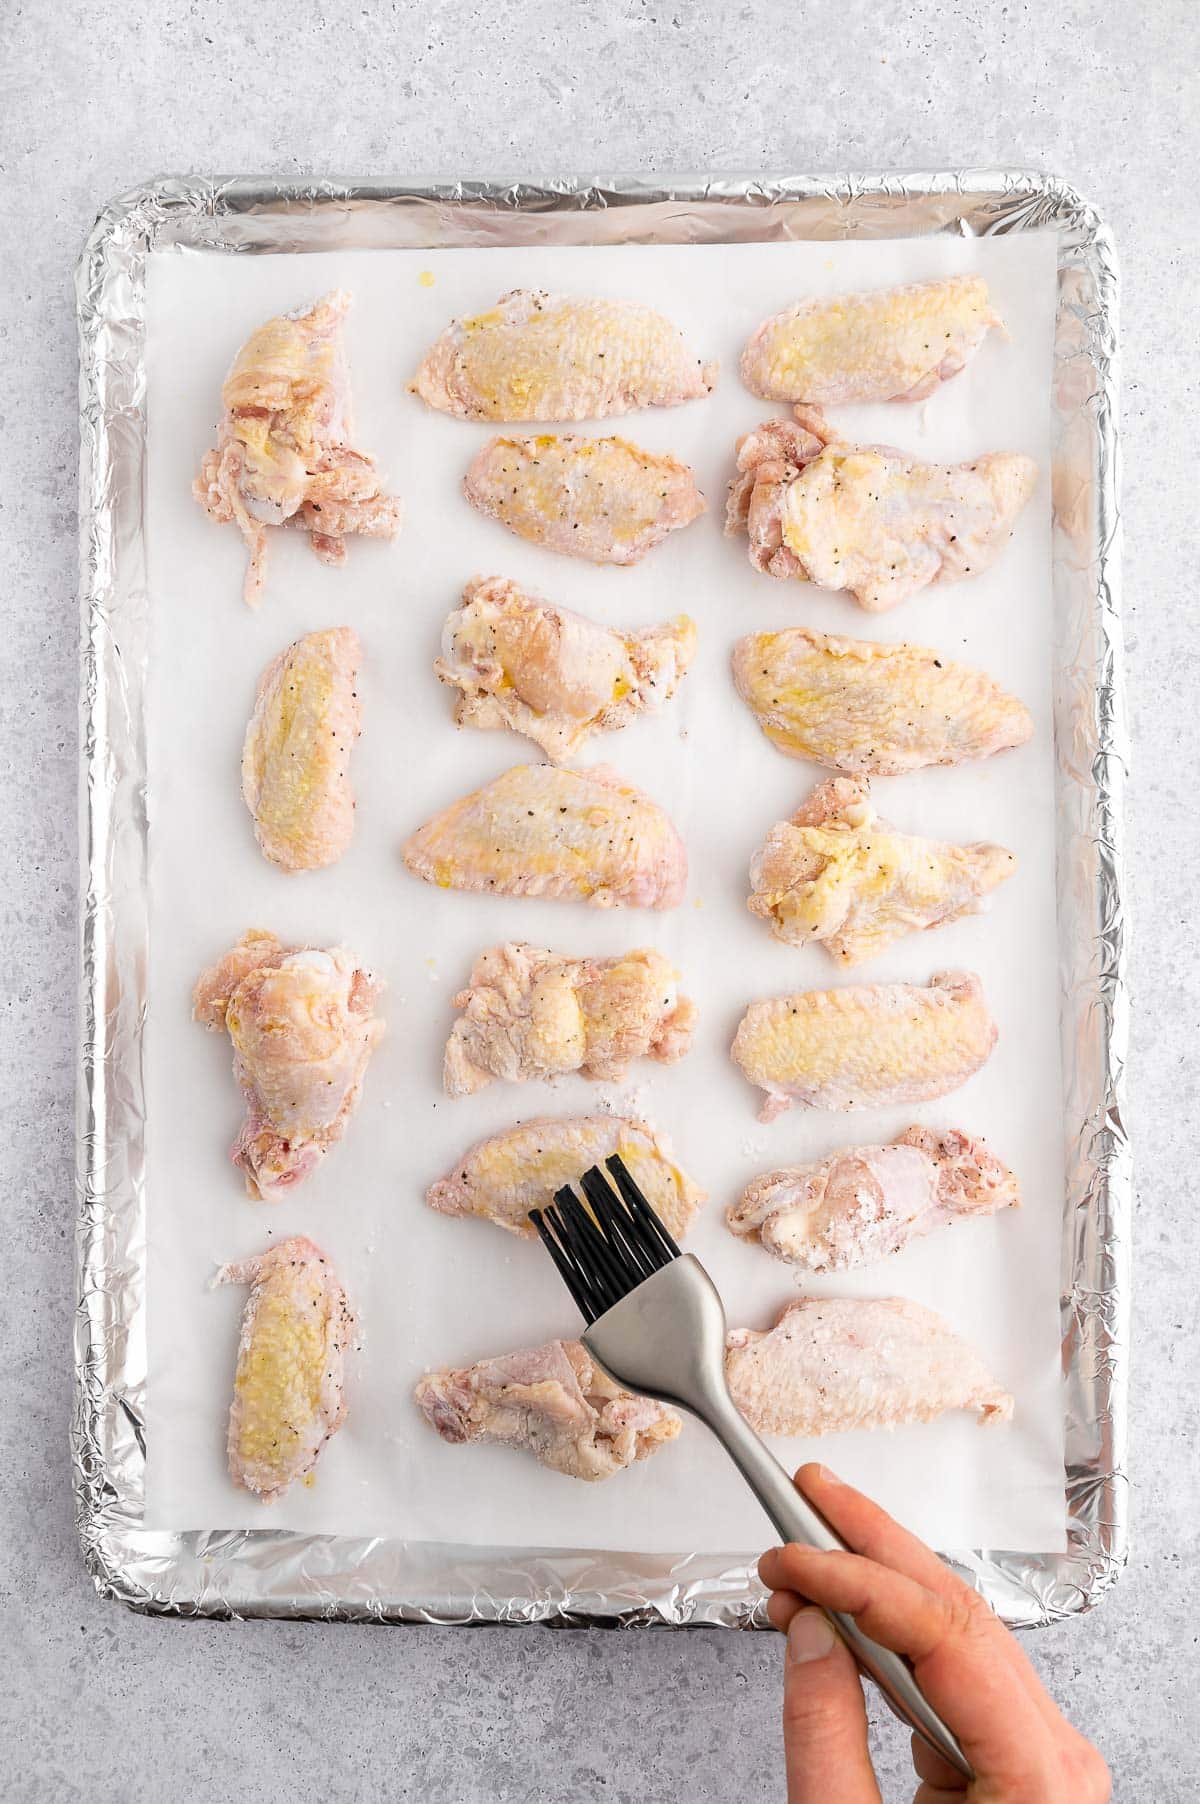 brushing raw chicken wings on a lined sheet pan with oil